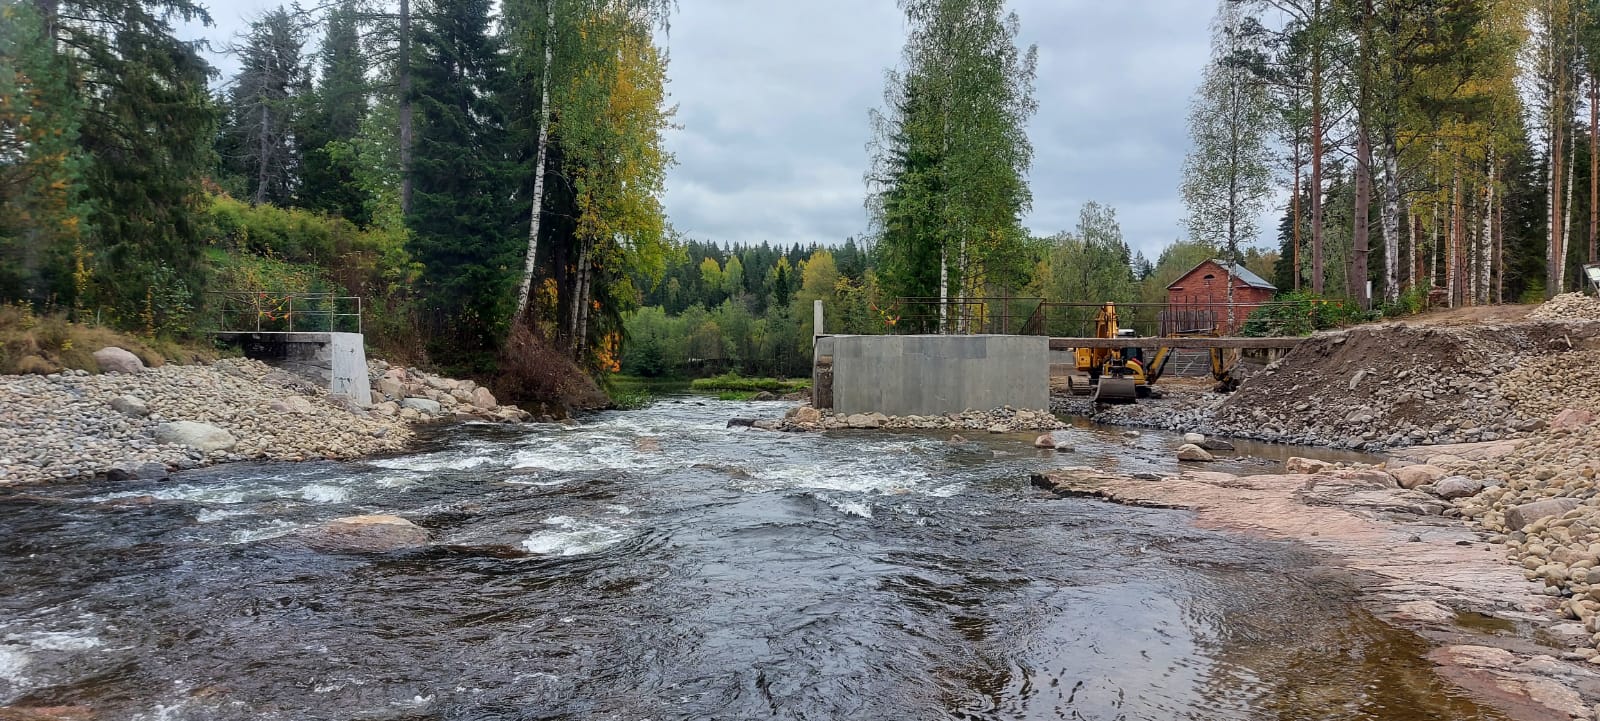 The Freeing of River Hiitolanjoki, the Largest Dam Removal Project in Finland, has Begun